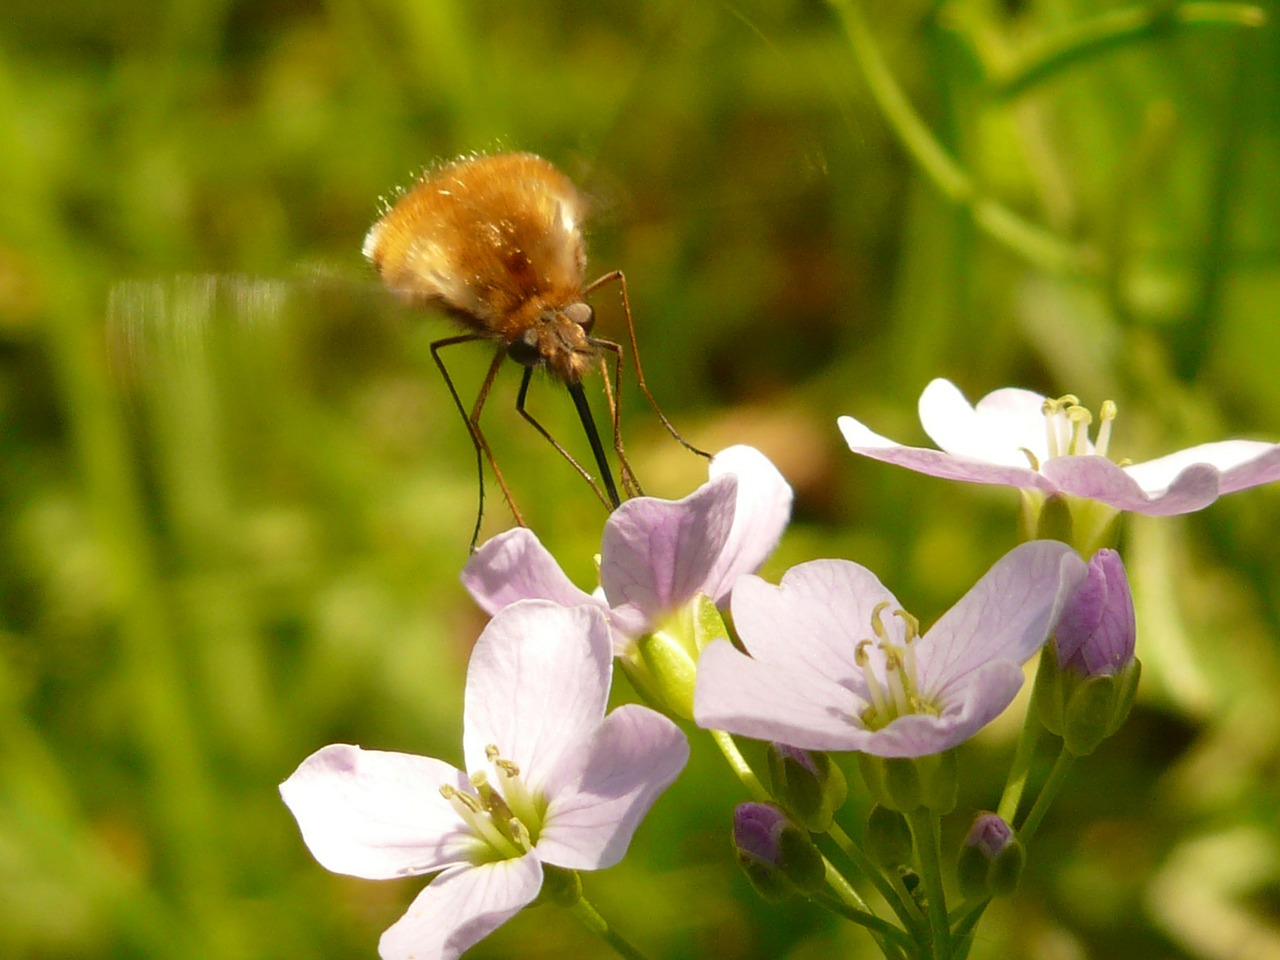 great wollschweber insect bombylius major free photo